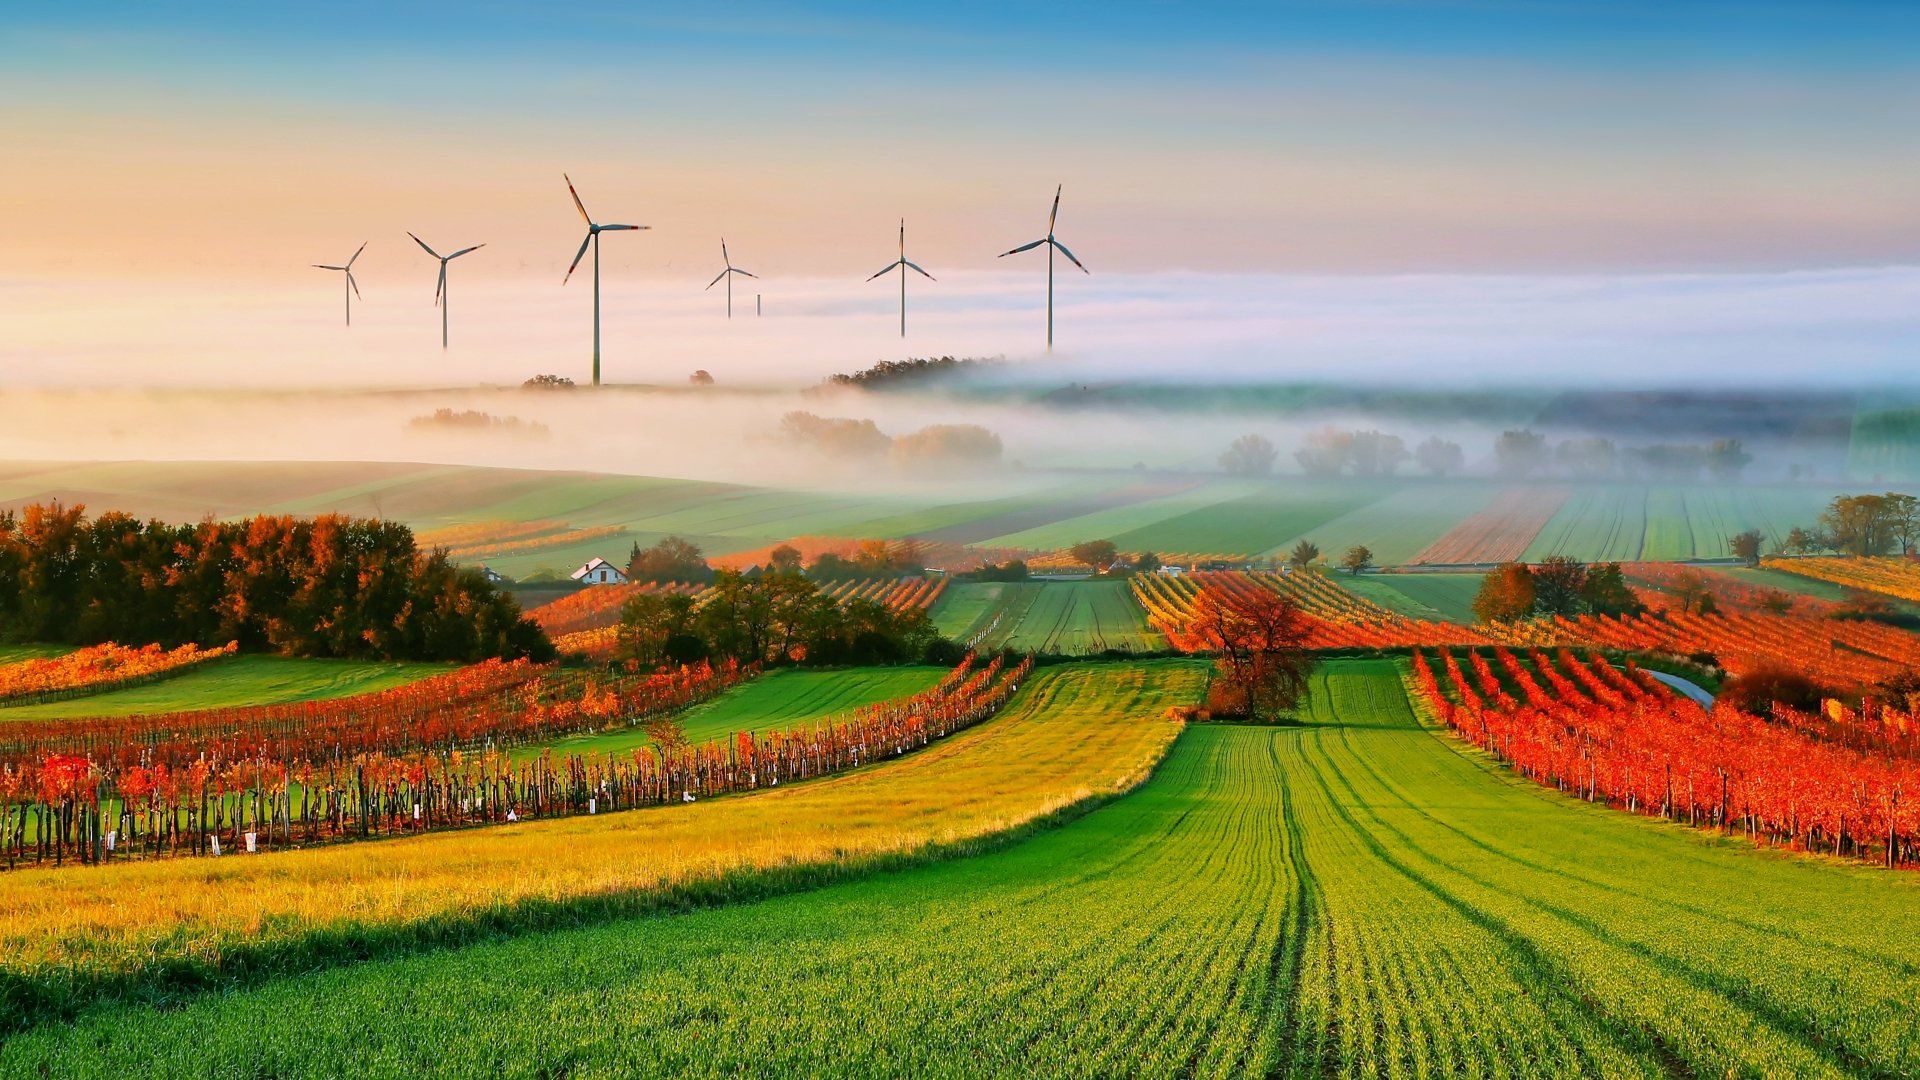 Wind Turbine HD Wallpaper and Background Image